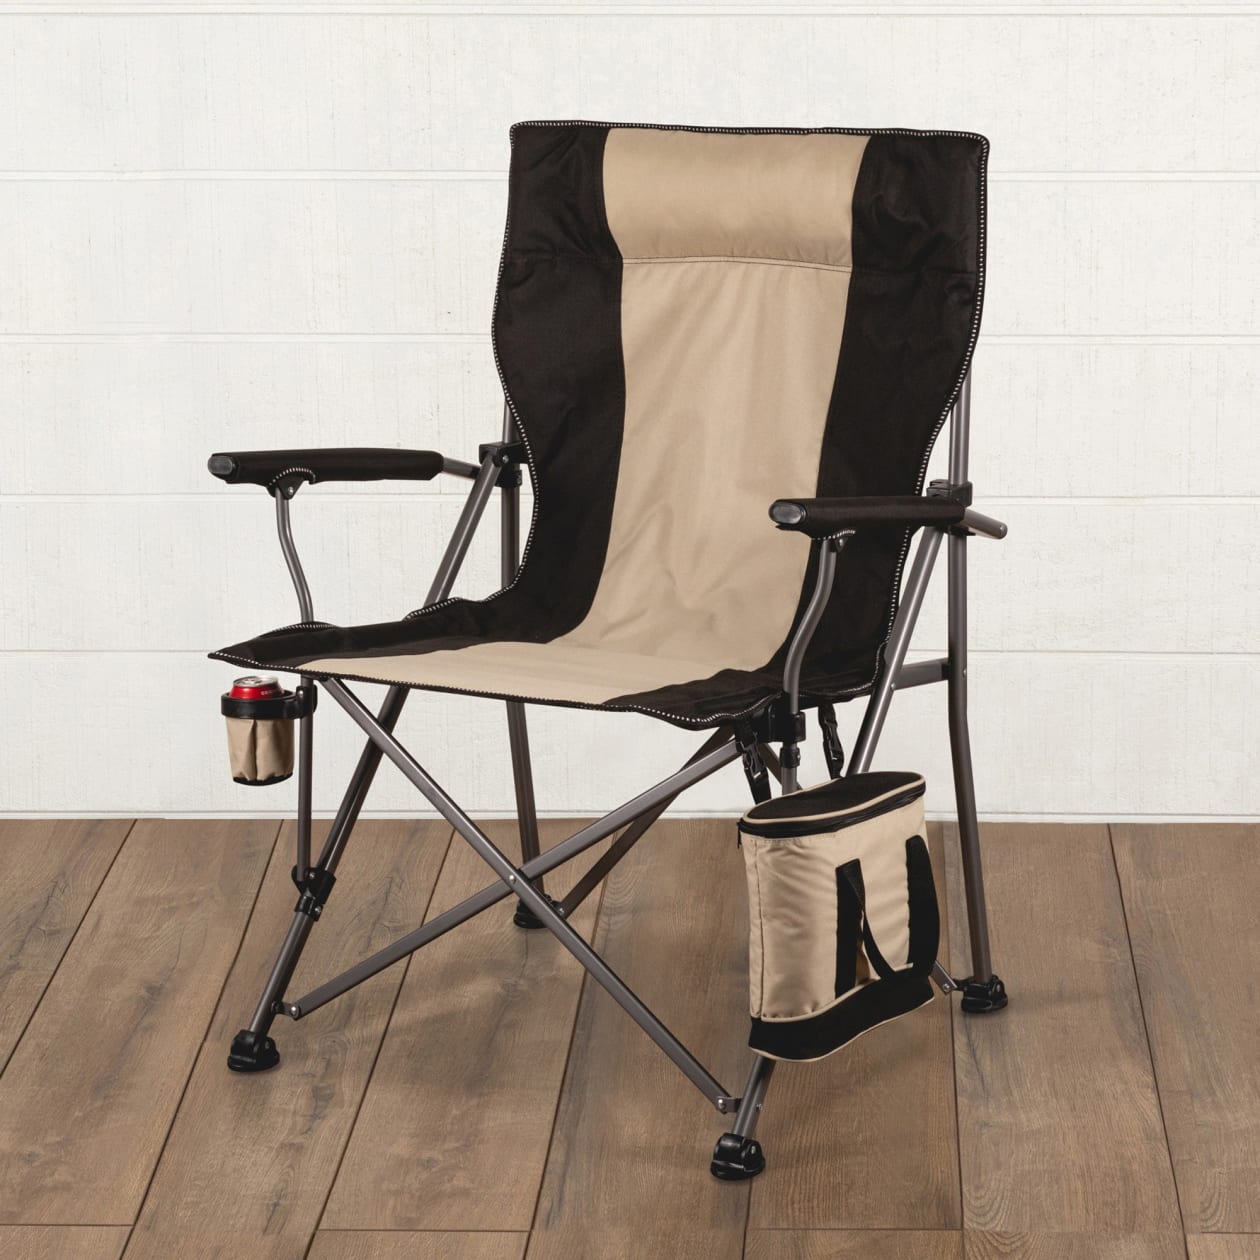 Big Bear XXL Camping Chair with Cooler - Color: Black